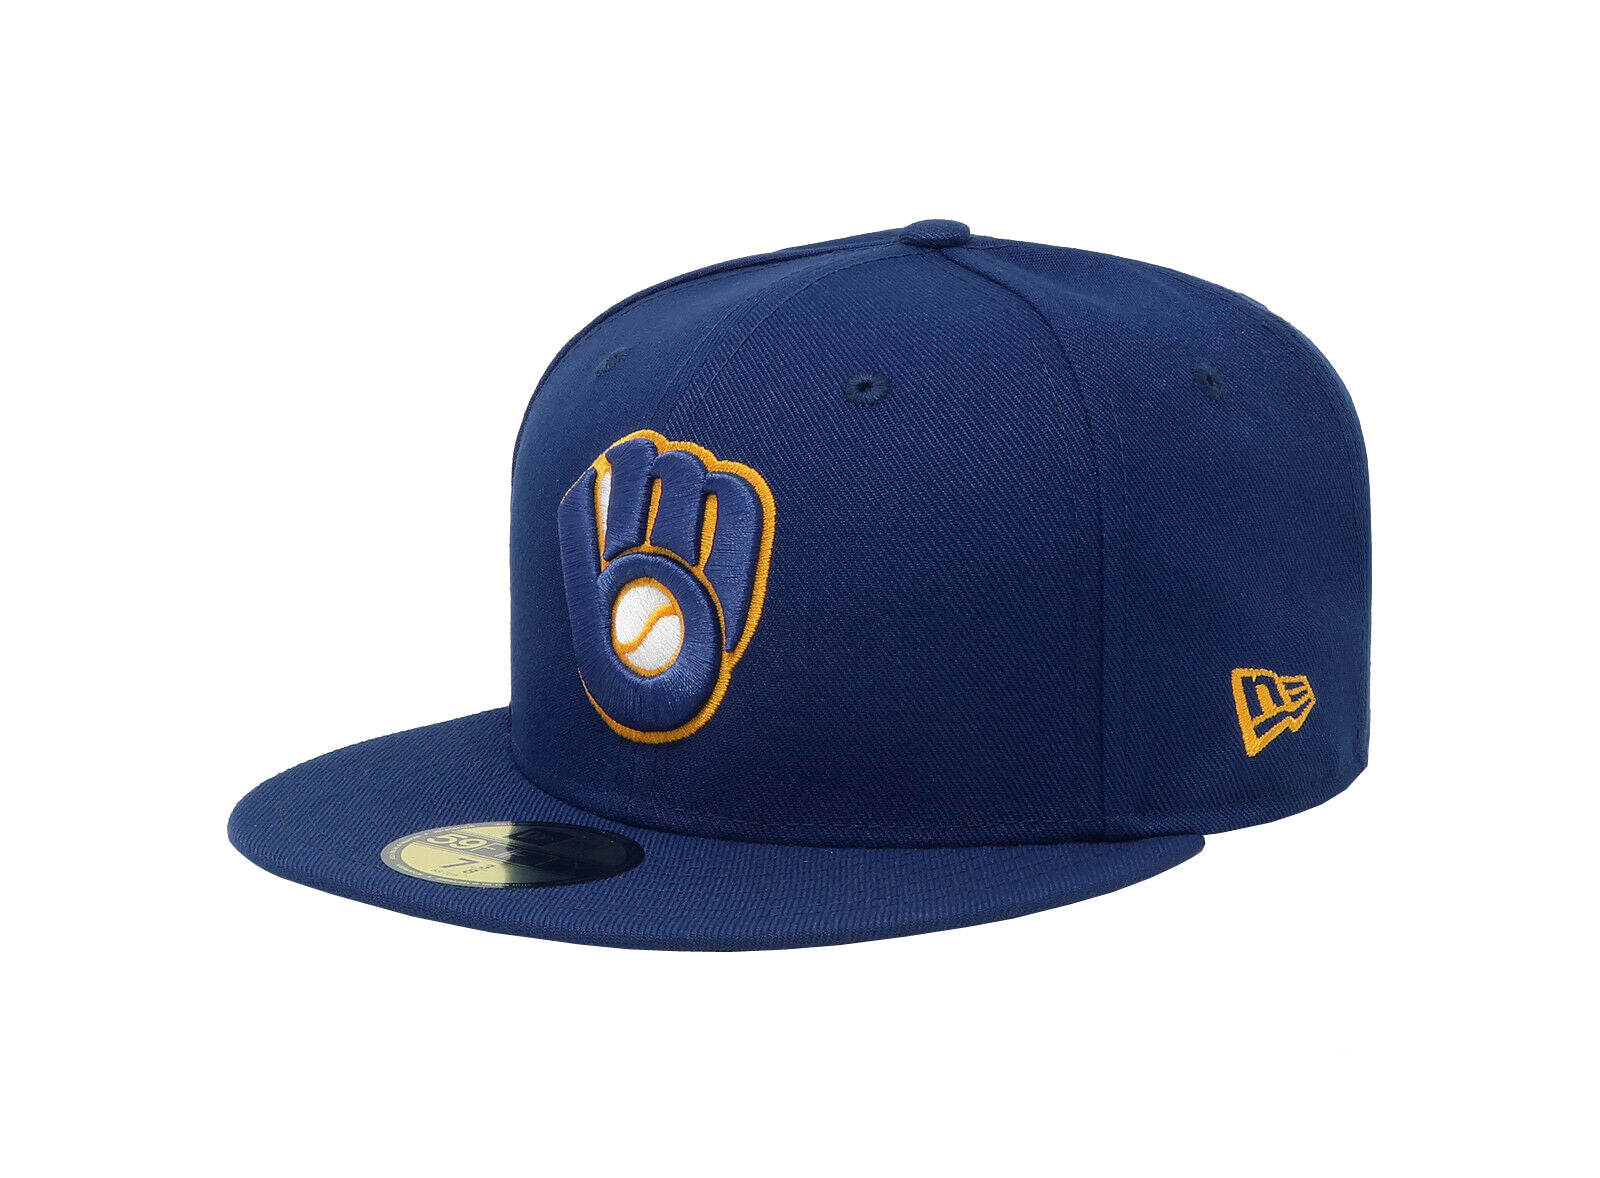 Men's New Era Royal Milwaukee Brewers 59FIFTY Fitted Hat